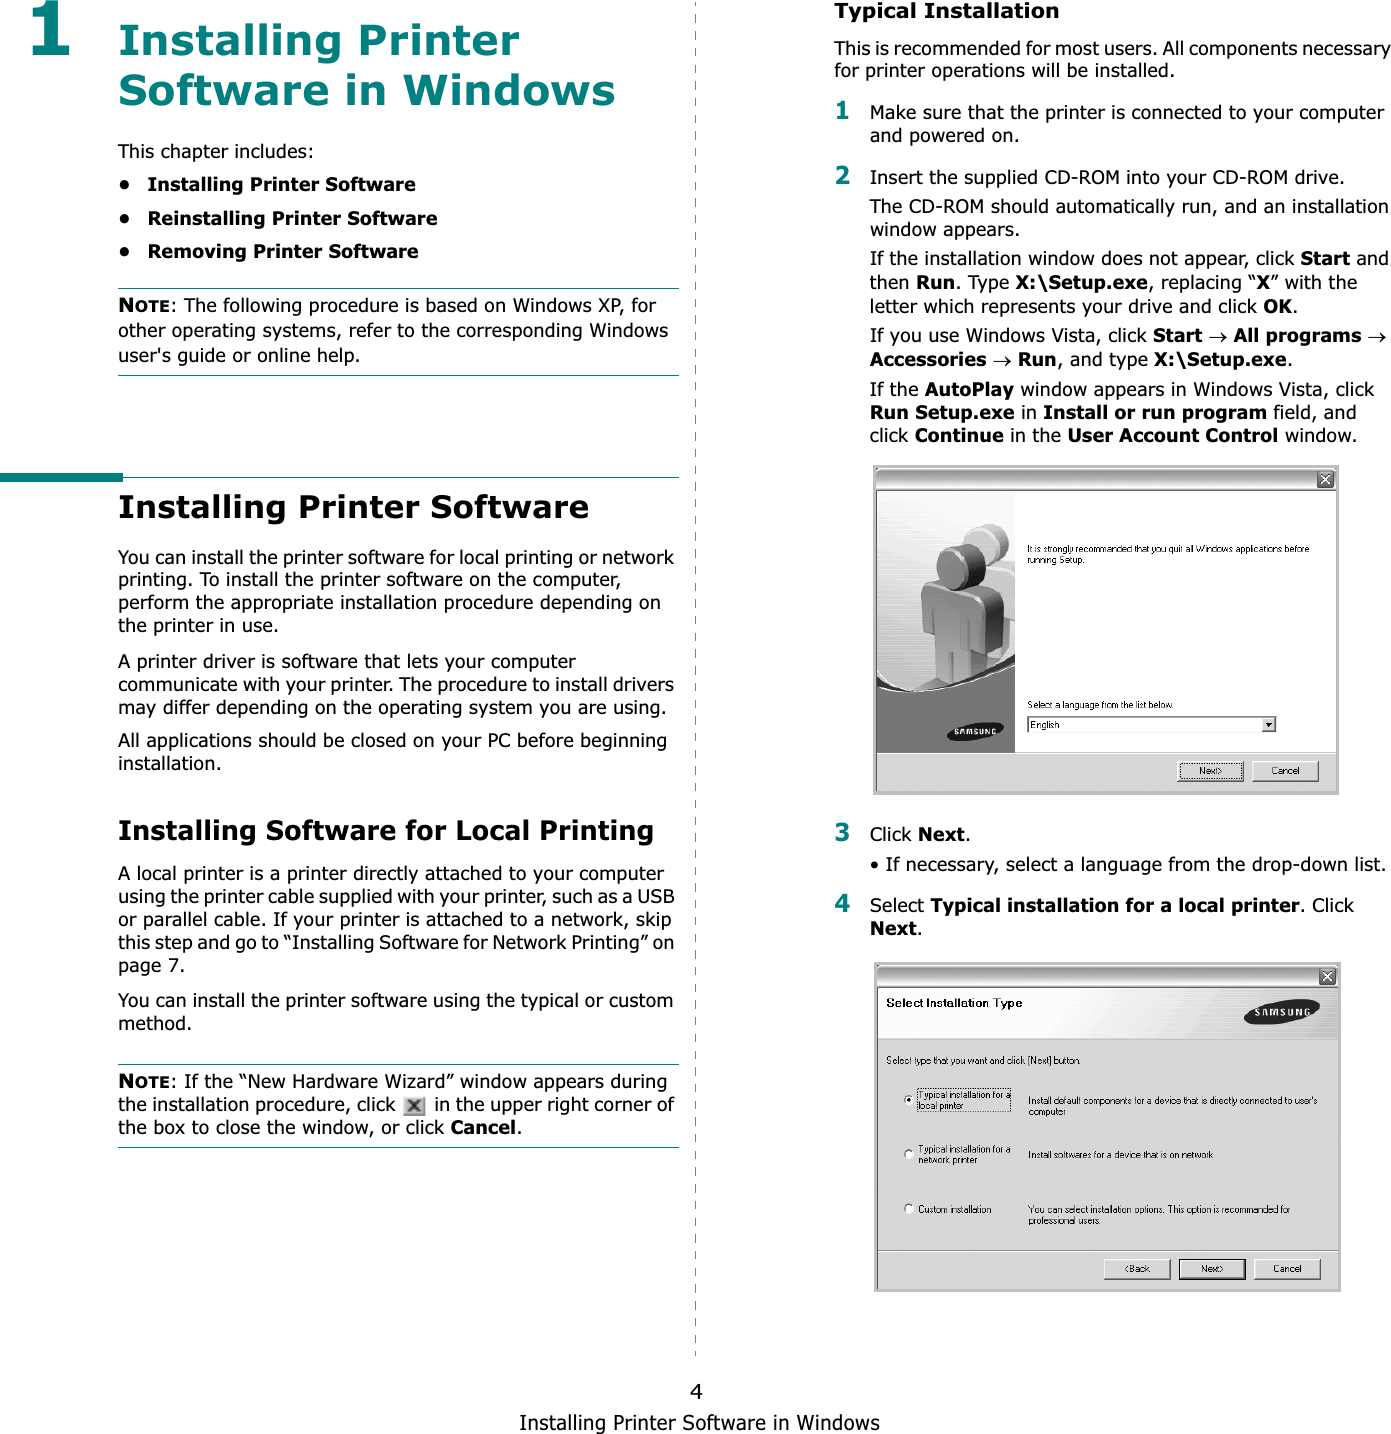 Installing Printer Software in Windows41Installing Printer Software in WindowsThis chapter includes:• Installing Printer Software• Reinstalling Printer Software•Removing Printer SoftwareNOTE: The following procedure is based on Windows XP, for other operating systems, refer to the corresponding Windows user&apos;s guide or online help.Installing Printer SoftwareYou can install the printer software for local printing or network printing. To install the printer software on the computer, perform the appropriate installation procedure depending on the printer in use.A printer driver is software that lets your computer communicate with your printer. The procedure to install drivers may differ depending on the operating system you are using.All applications should be closed on your PC before beginning installation. Installing Software for Local PrintingA local printer is a printer directly attached to your computer using the printer cable supplied with your printer, such as a USB or parallel cable. If your printer is attached to a network, skip this step and go to “Installing Software for Network Printing” on page 7.You can install the printer software using the typical or custom method.NOTE: If the “New Hardware Wizard” window appears during the installation procedure, click   in the upper right corner of the box to close the window, or click Cancel.Typical InstallationThis is recommended for most users. All components necessary for printer operations will be installed.1Make sure that the printer is connected to your computer and powered on.2Insert the supplied CD-ROM into your CD-ROM drive.The CD-ROM should automatically run, and an installation window appears.If the installation window does not appear, click Start and then Run. Type X:\Setup.exe, replacing “X” with the letter which represents your drive and click OK.If you use Windows Vista, click StartoAll programsoAccessoriesoRun, and type X:\Setup.exe.If the AutoPlay window appears in Windows Vista, click Run Setup.exe in Install or run program field, and clickContinue in the User Account Control window.3Click Next.• If necessary, select a language from the drop-down list.4Select Typical installation for a local printer. Click Next.